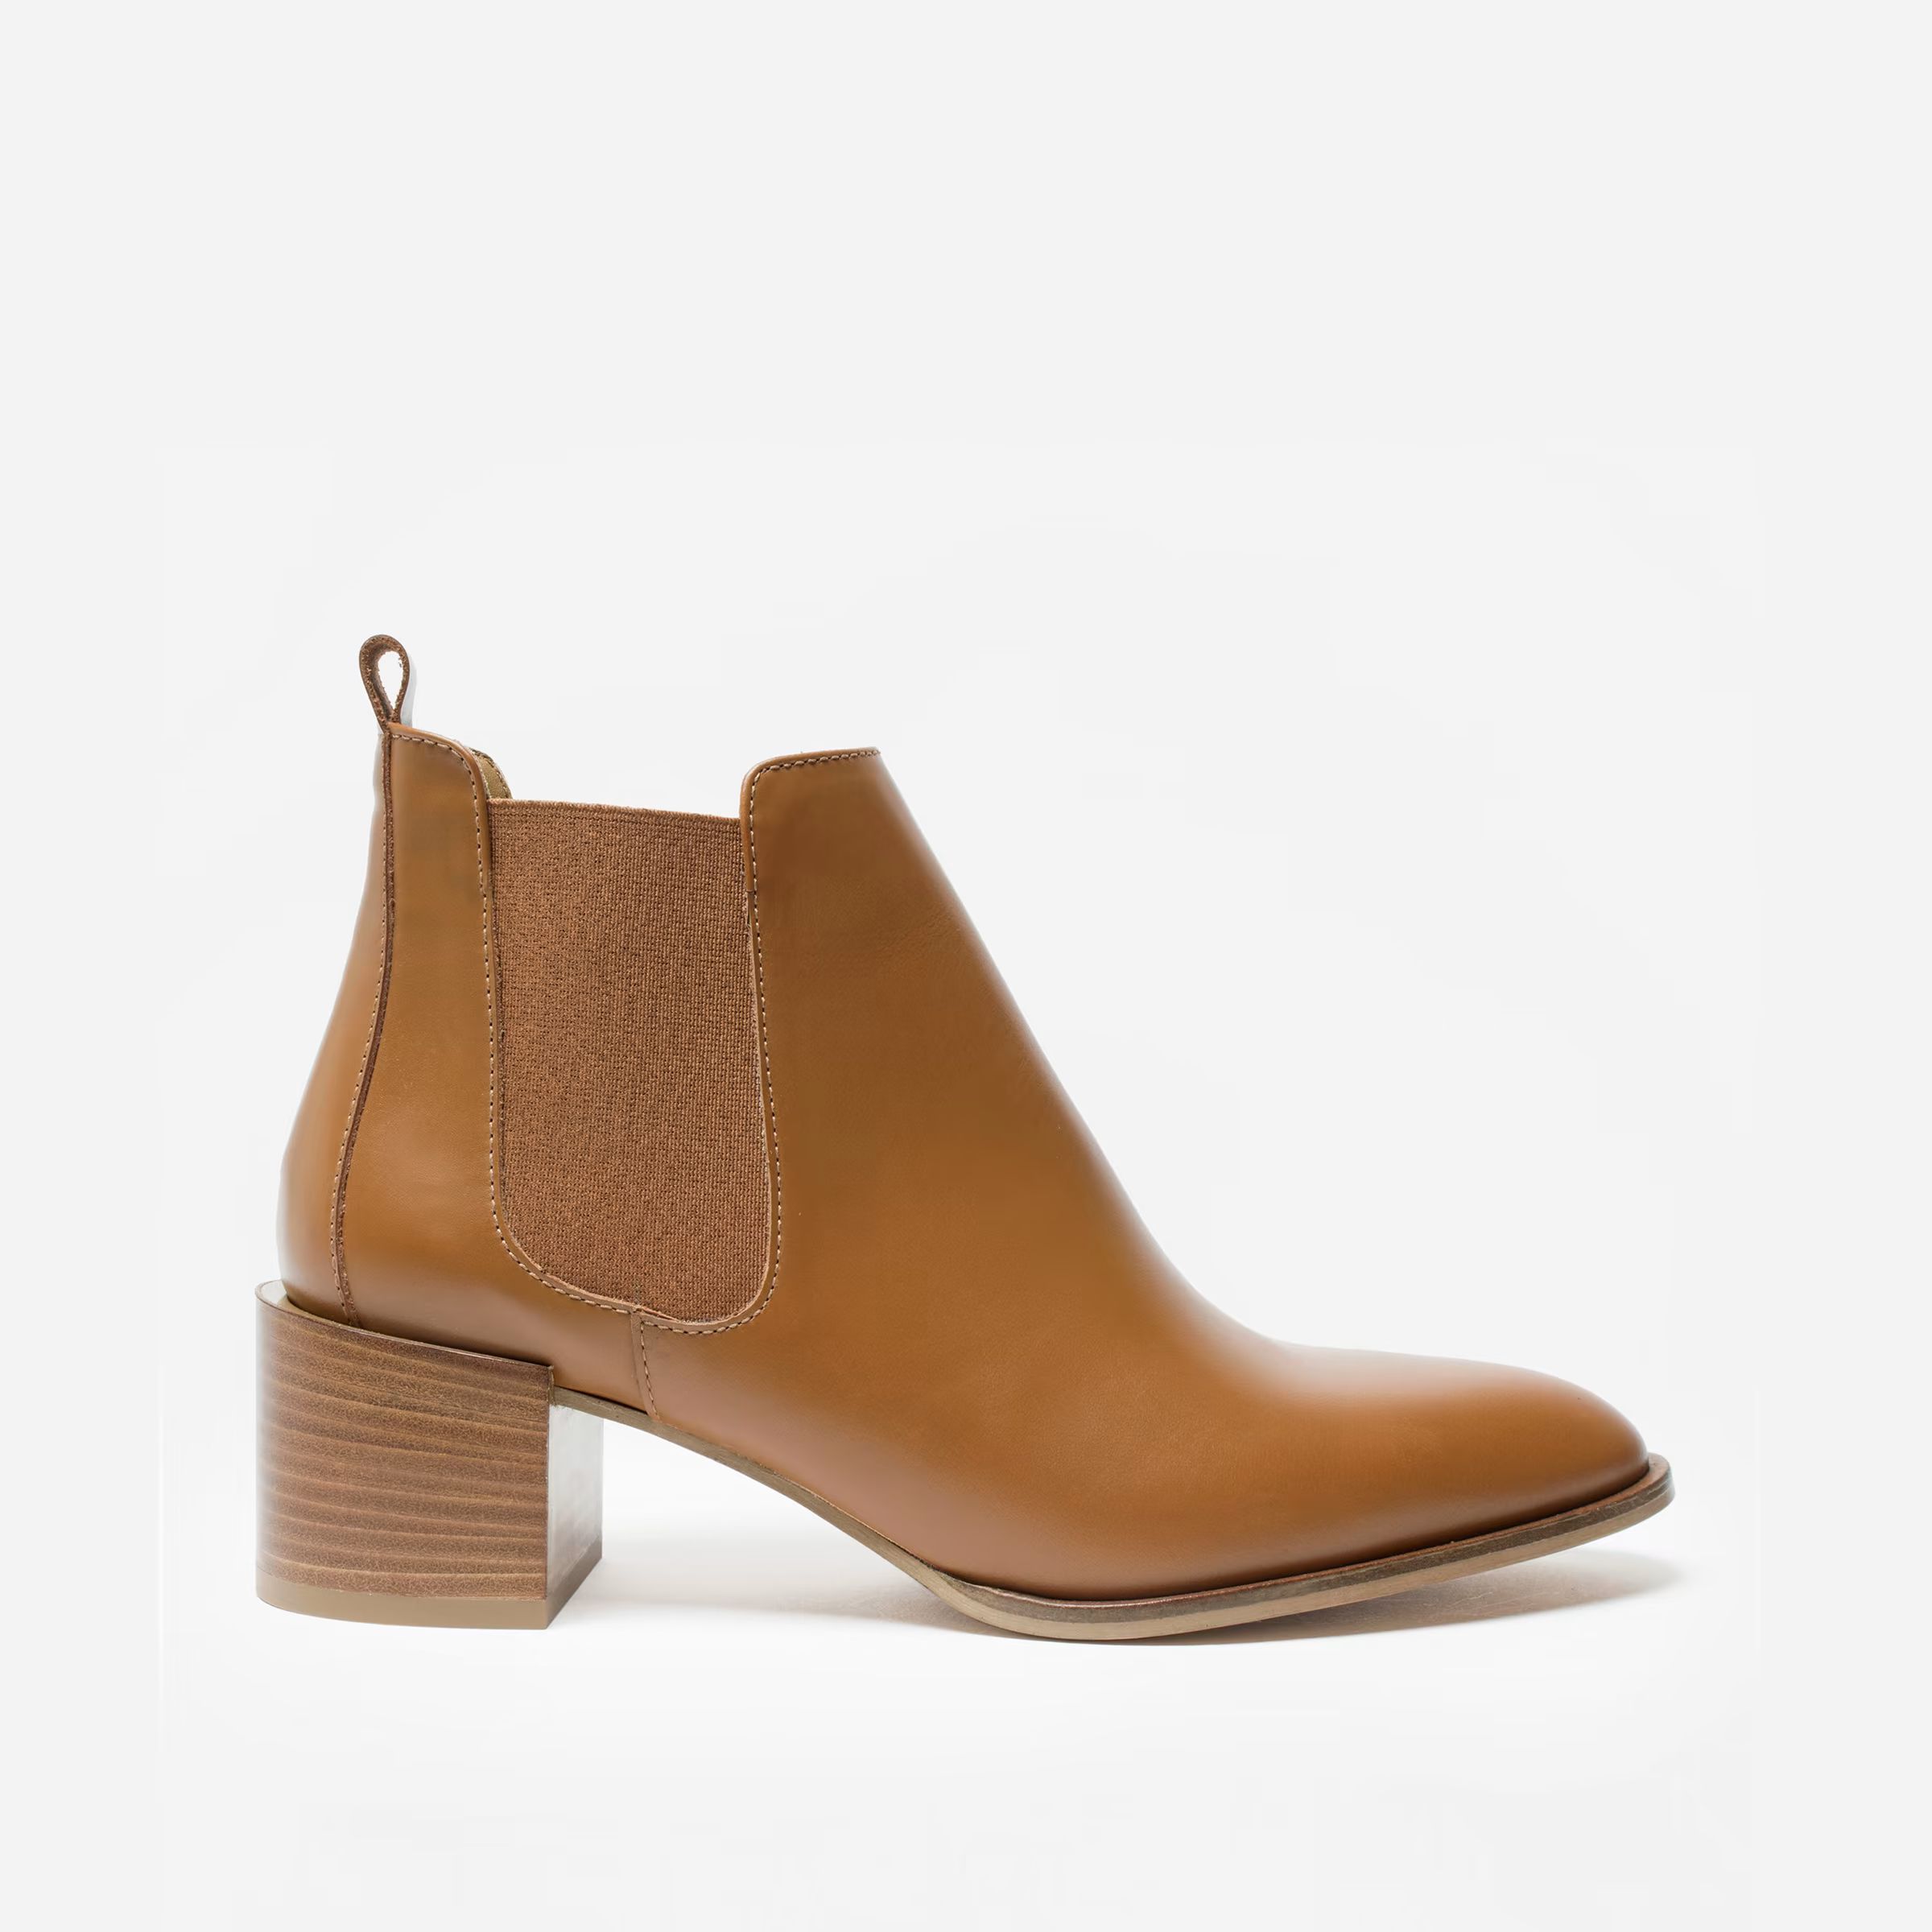 DetailsFits true to size100% Italian leatherTreat with leather protectant spray; Clean with leath... | Everlane